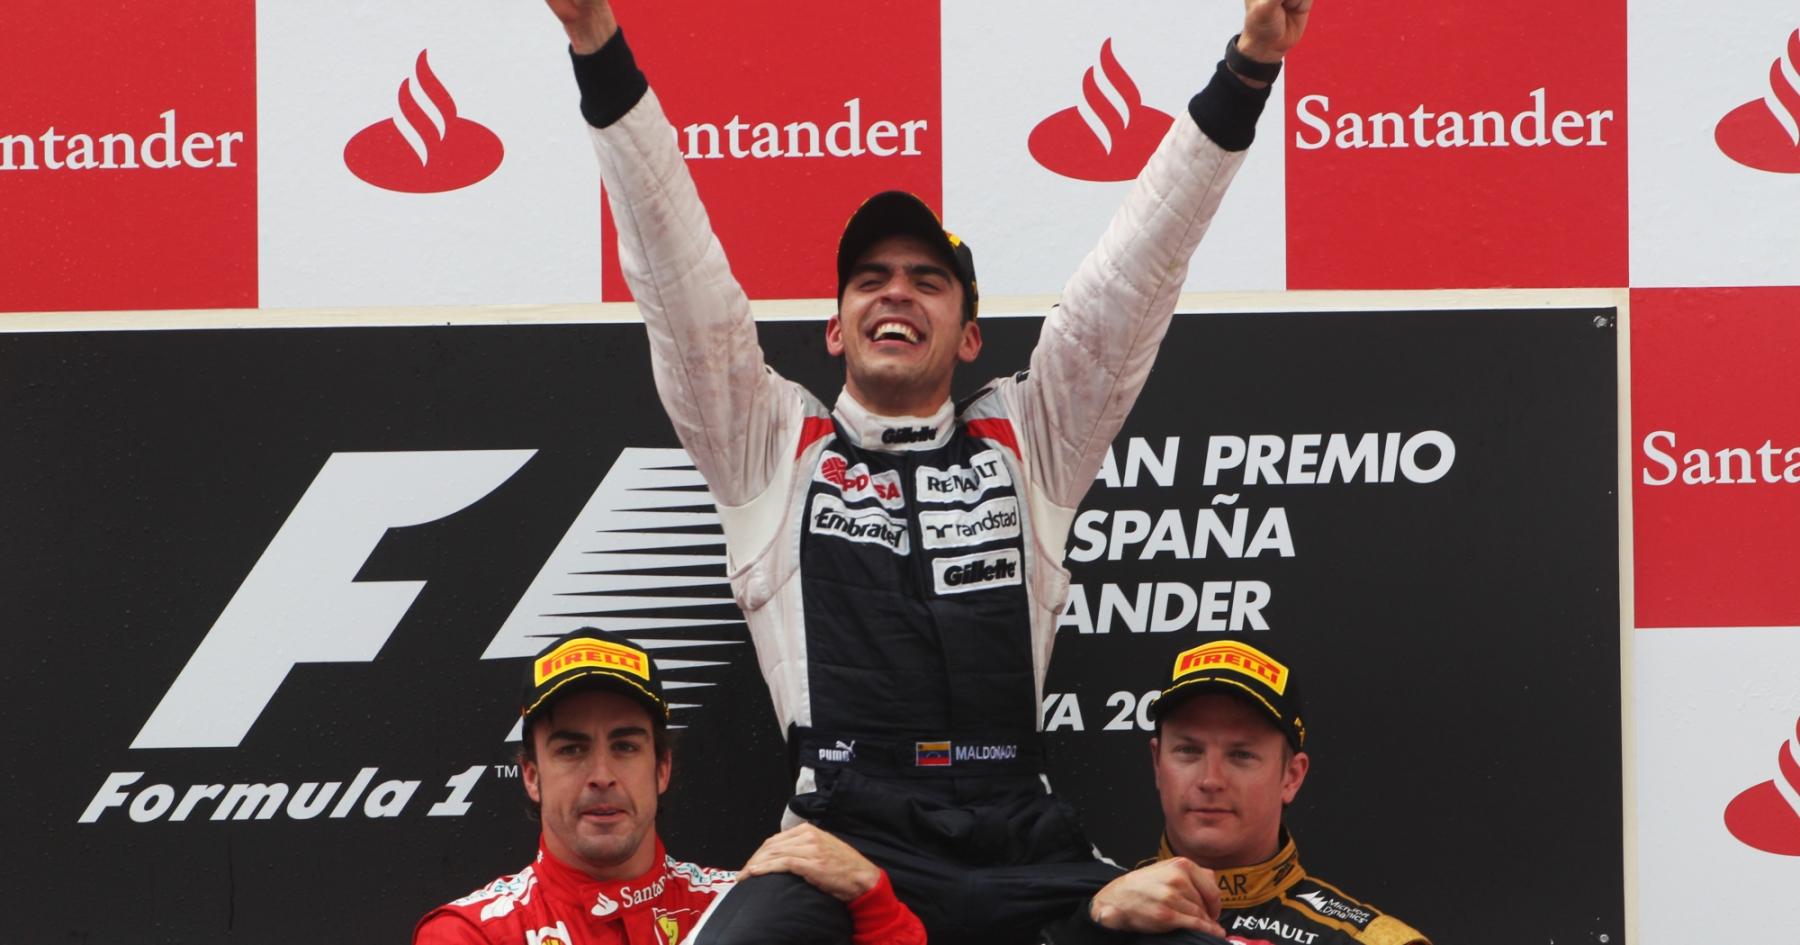 Through the highs and horrors: Maldonado's monumental victory